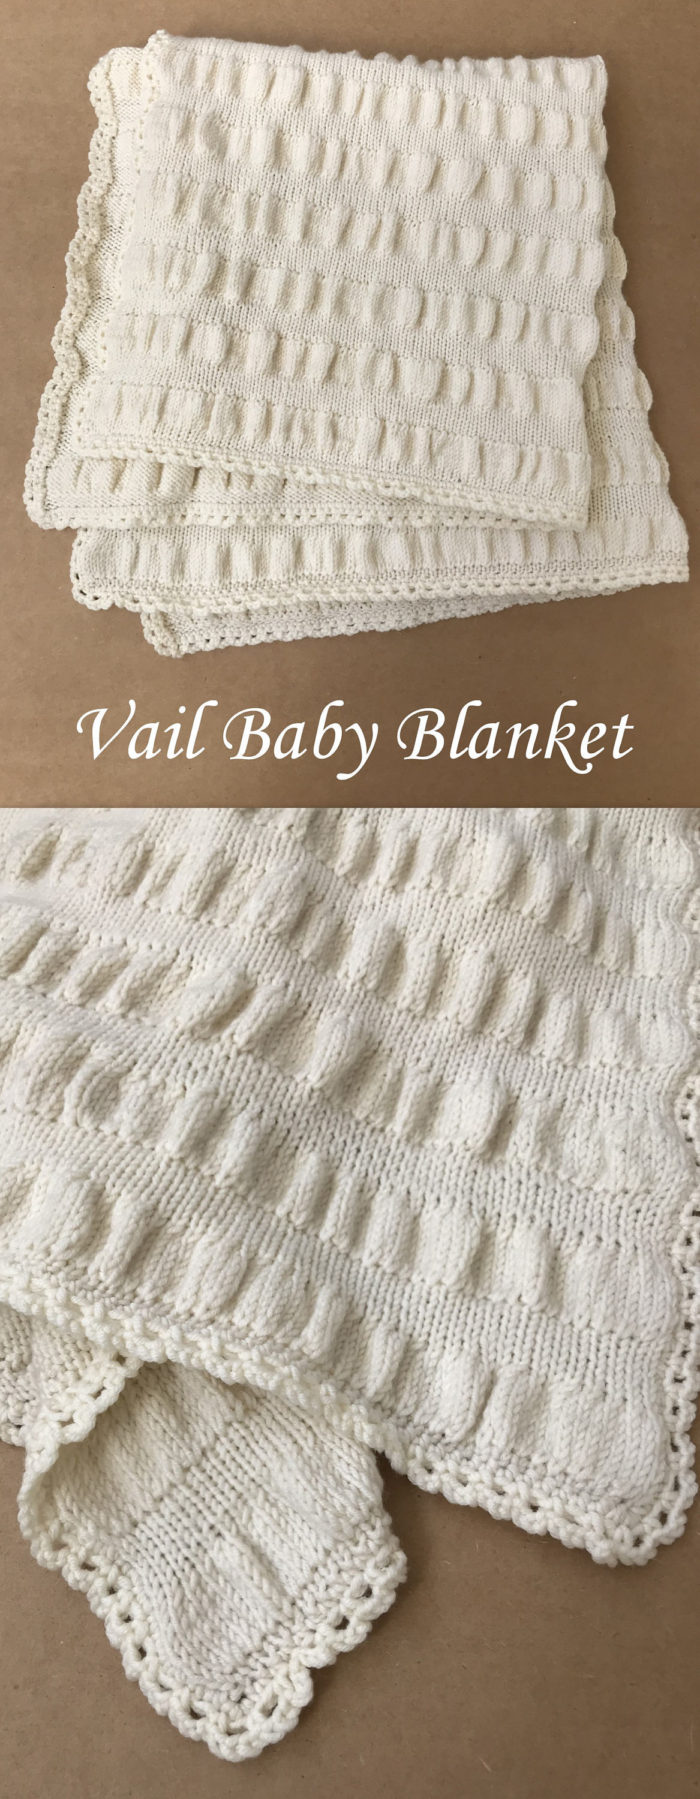 Knitting Pattern for Vail Baby Blanket